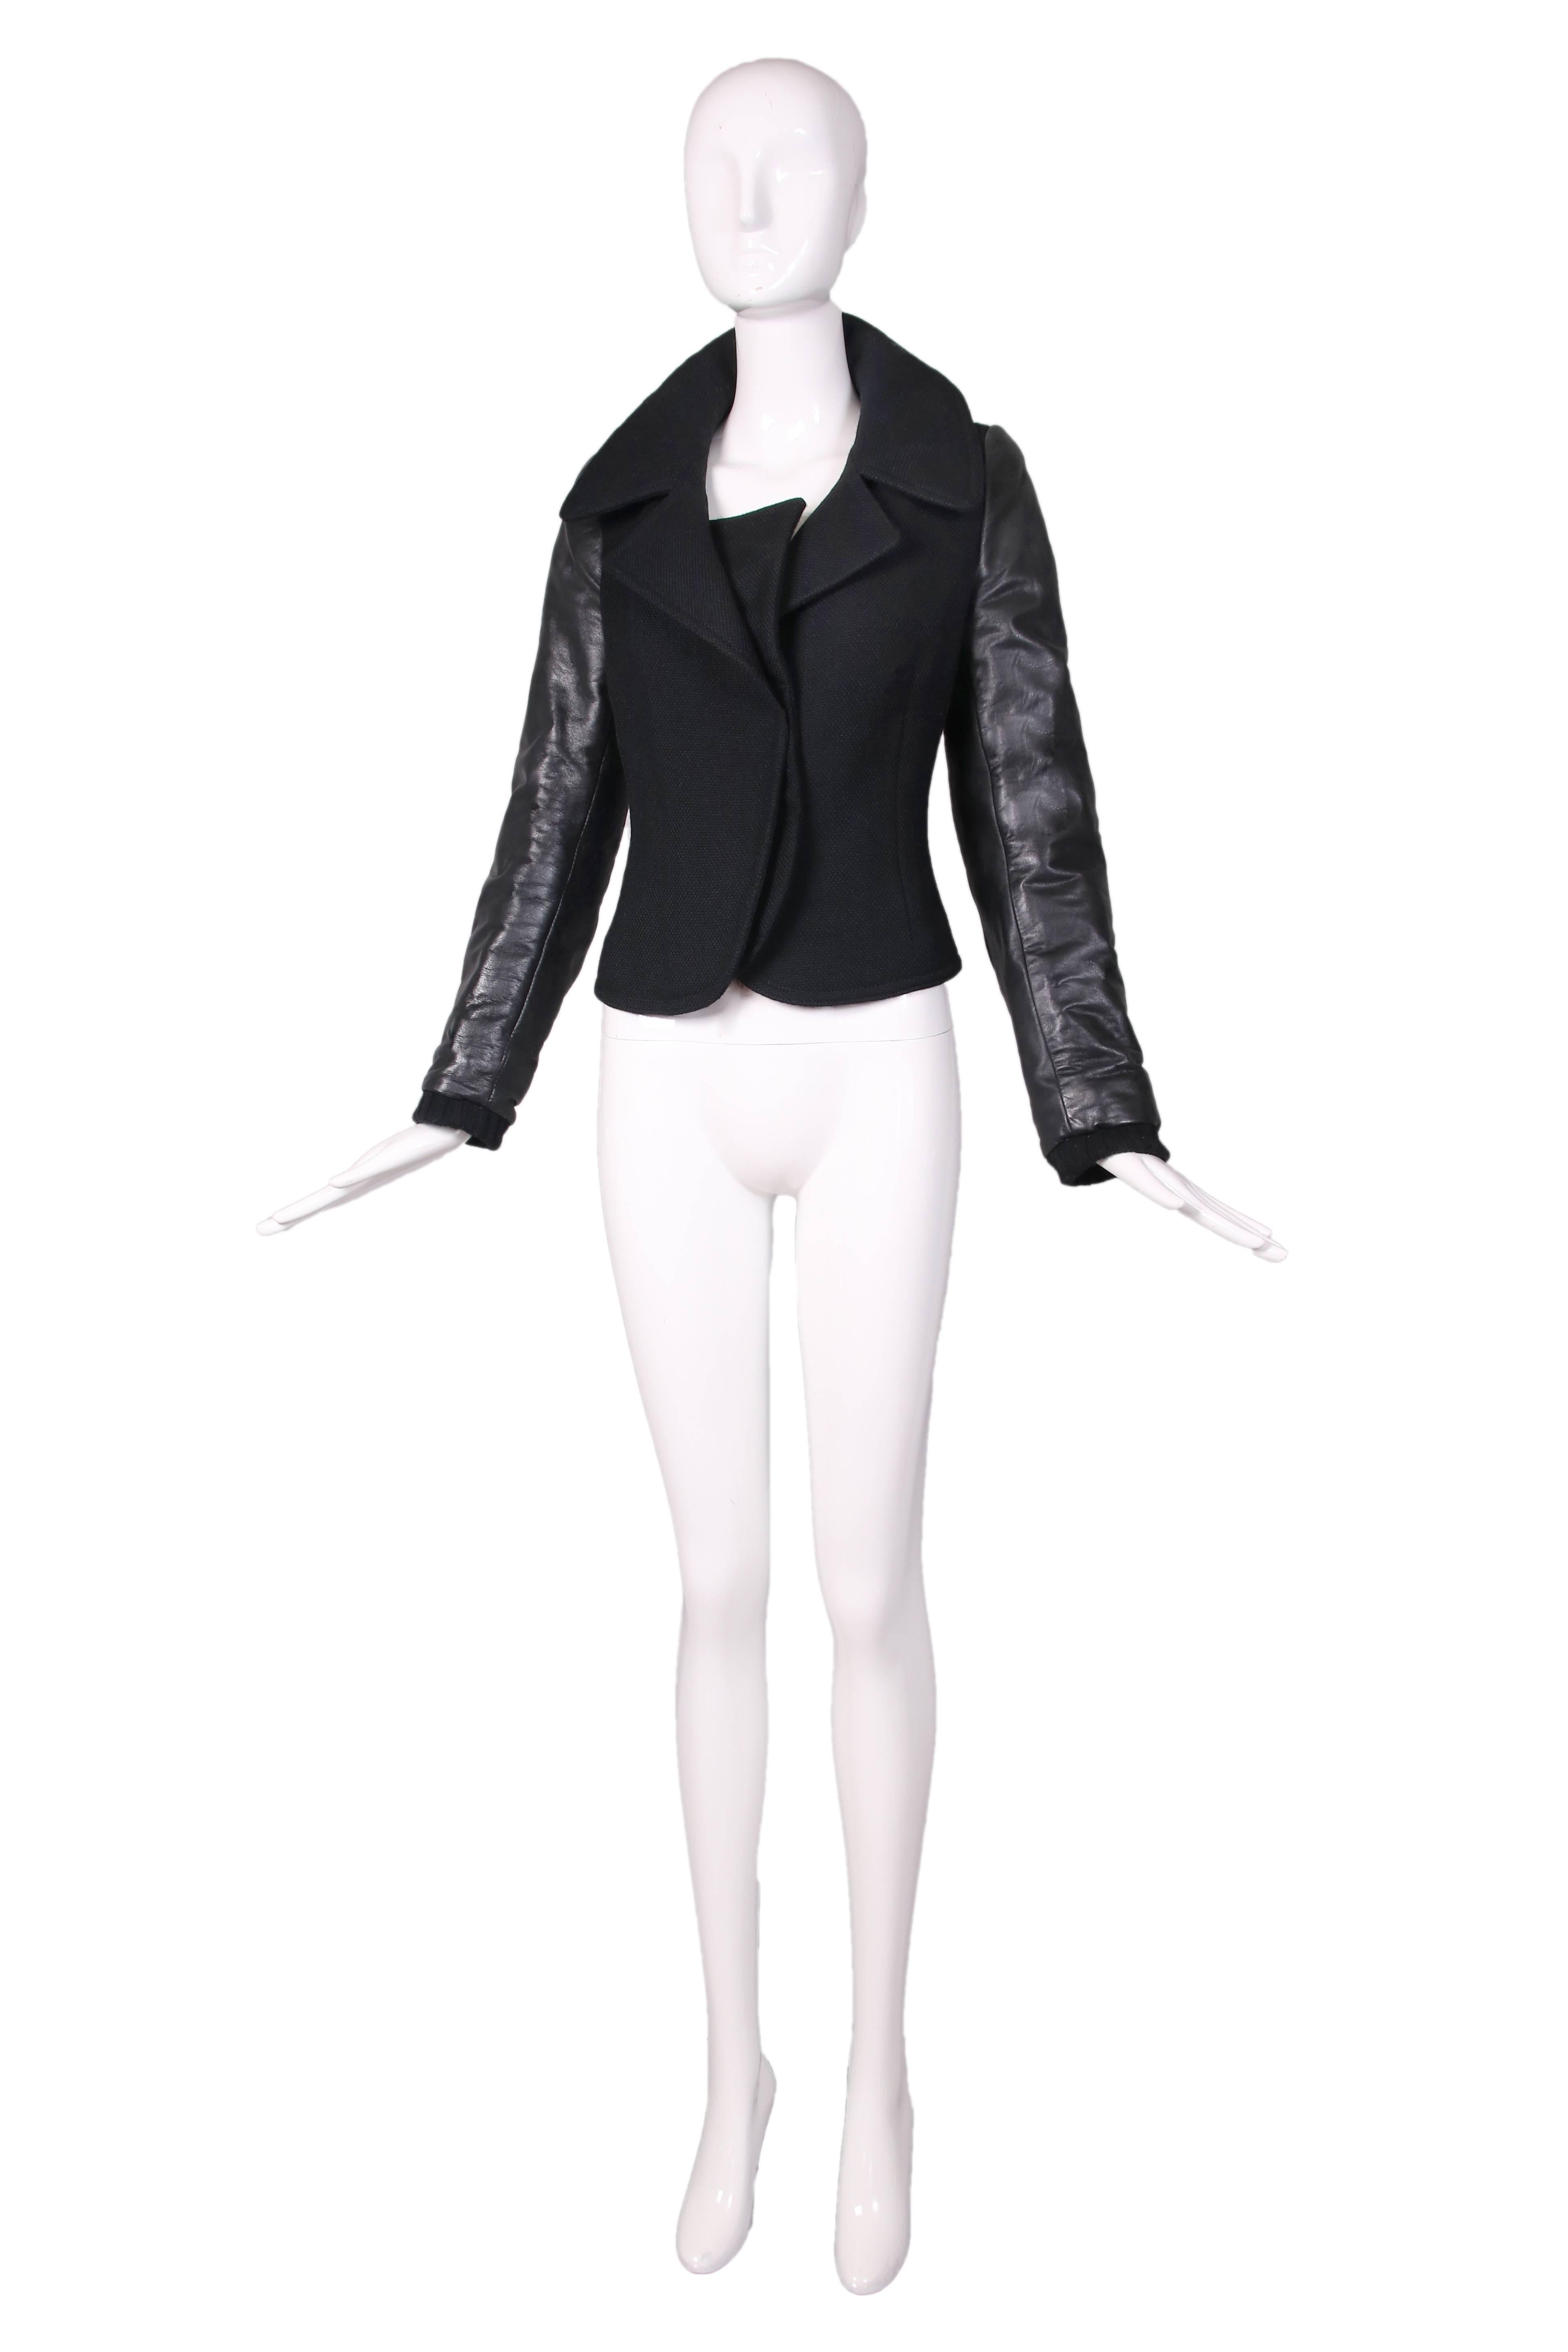 Balenciaga by Ghesquiere black biker or flight style jacket w/leather sleeves and wool blend bodice and cuffs. In excellent condition. Size EU 38.
MEASUREMENTS:
Bust - 36